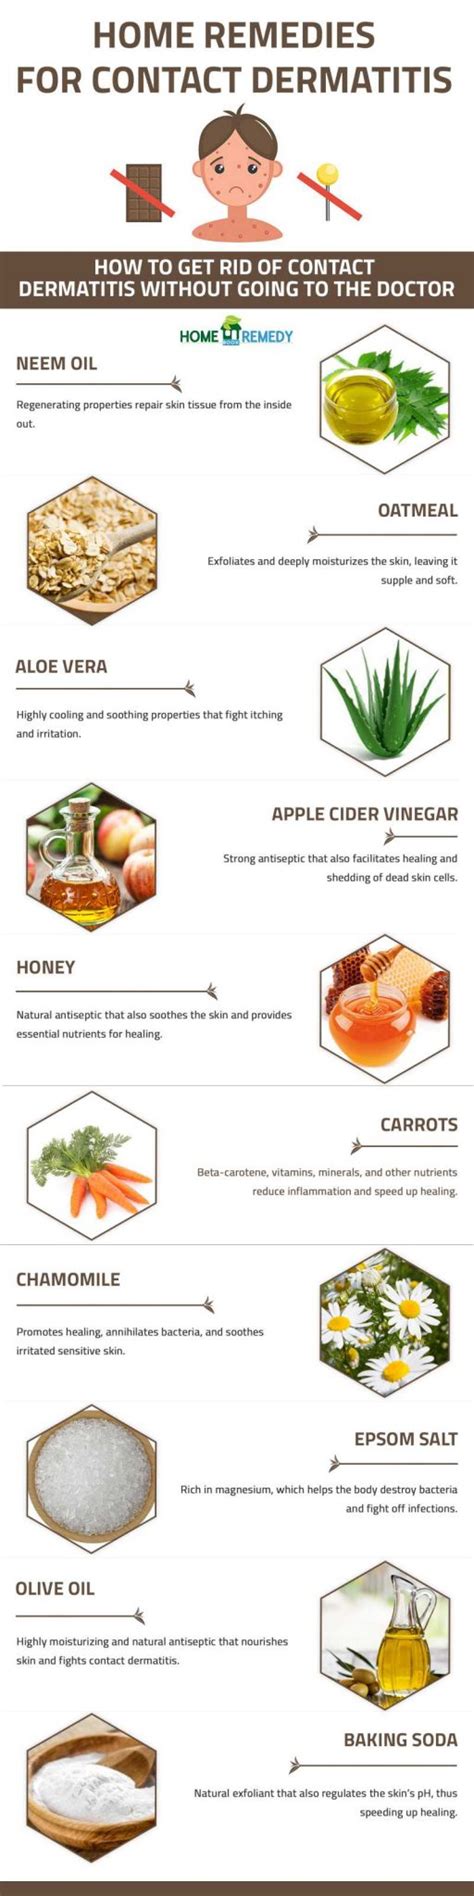 12 Home Remedies For Contact Dermatitis Infographic